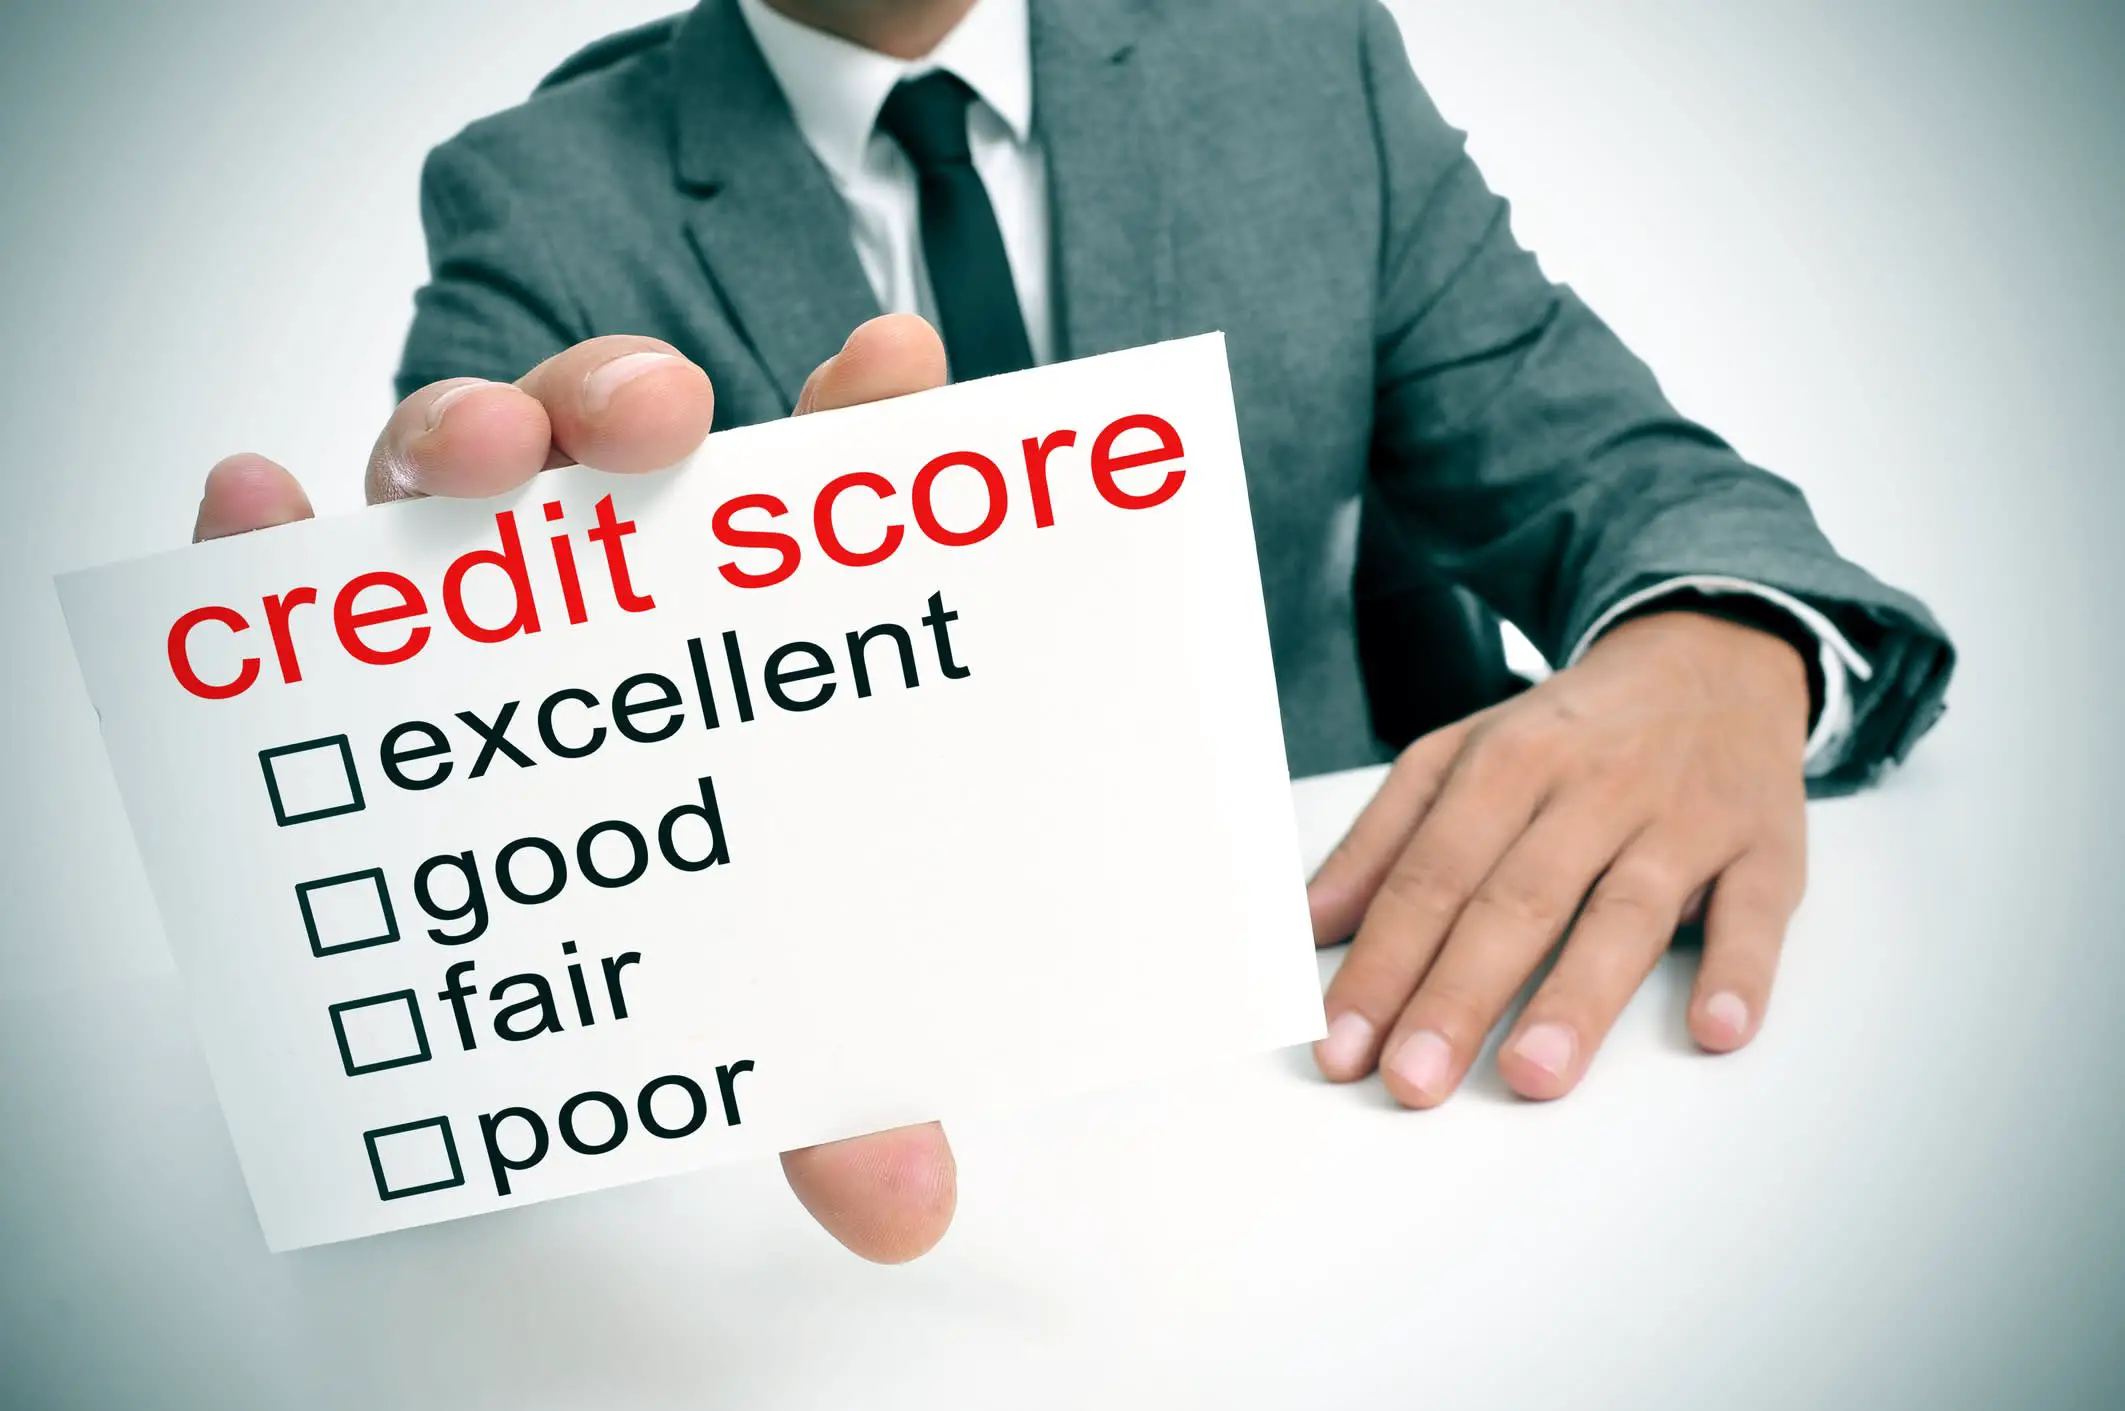 What Credit Score Do I Need for a Home Loan?